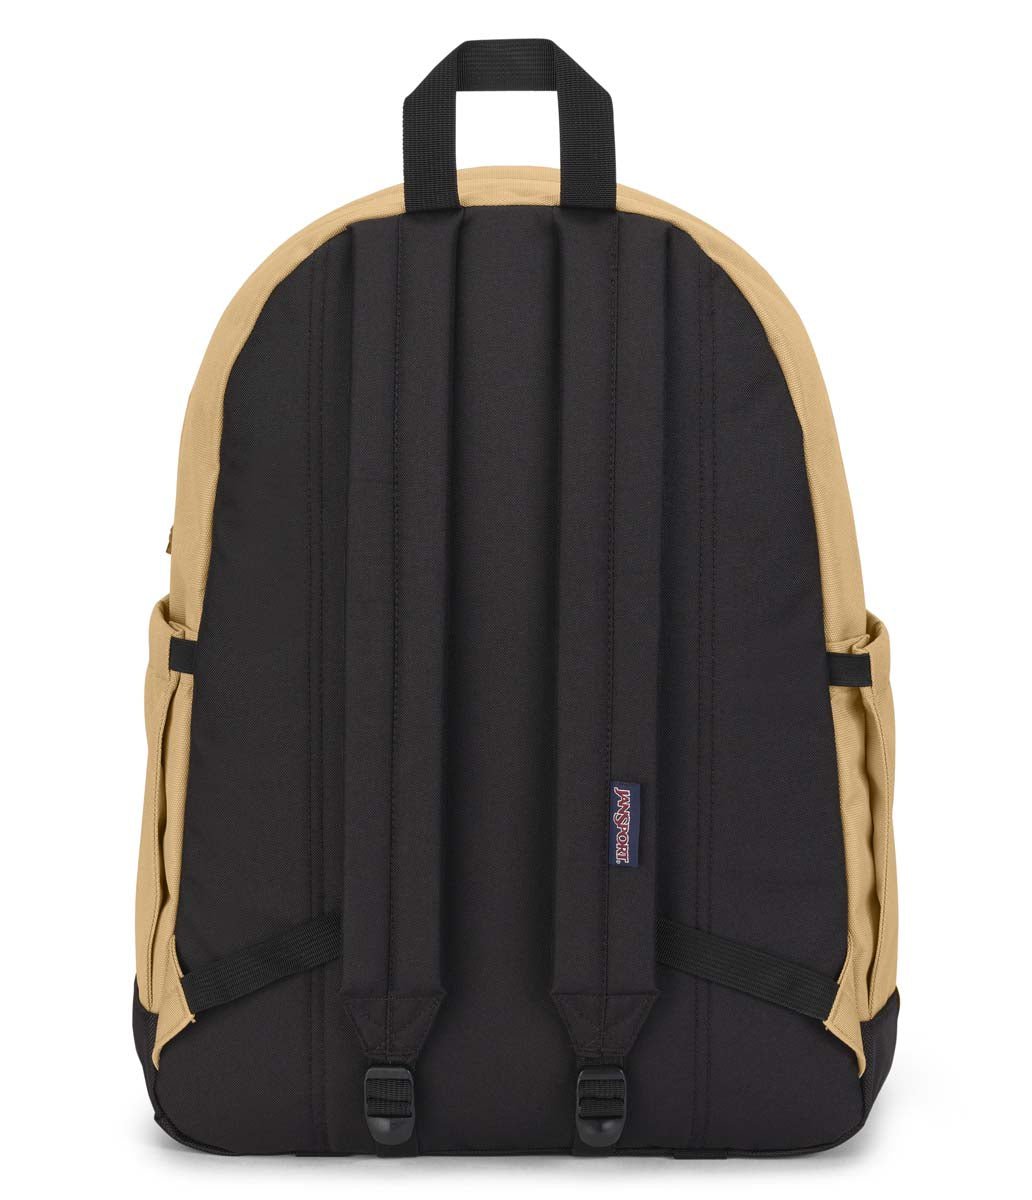 JanSport Lodo Pack - Curry